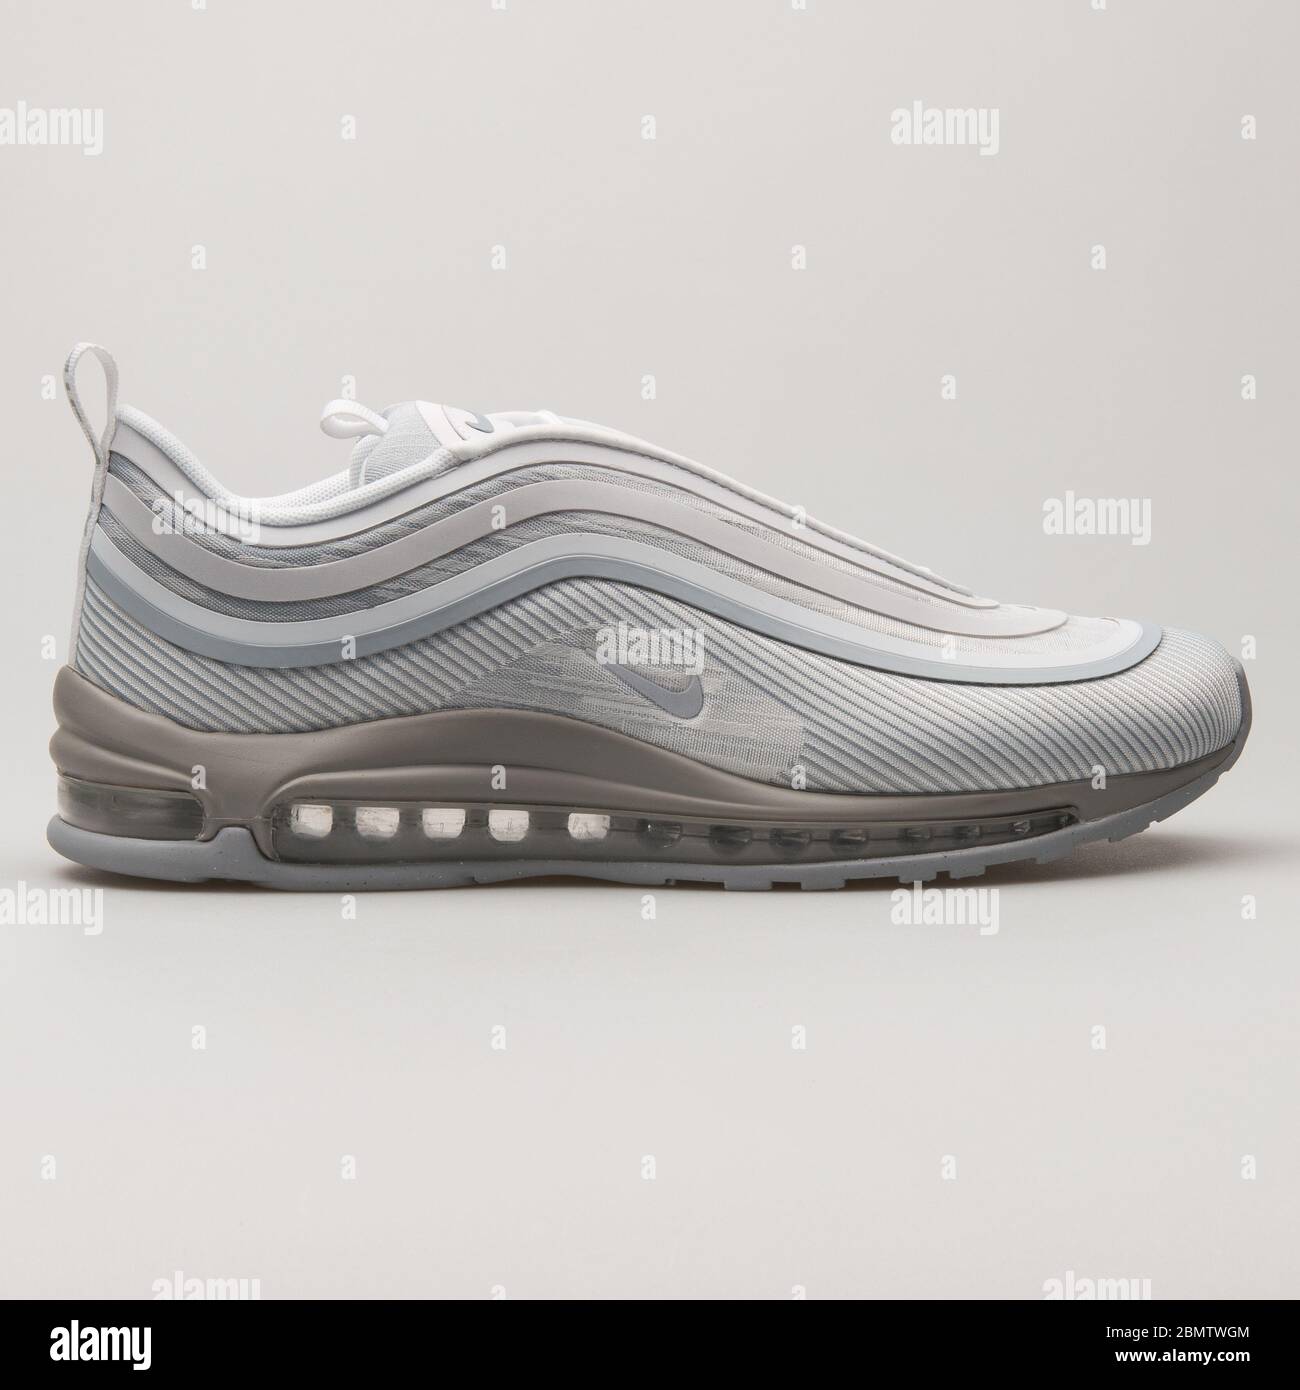 Air Max 97 High Resolution Stock Photography and Images - Alamy